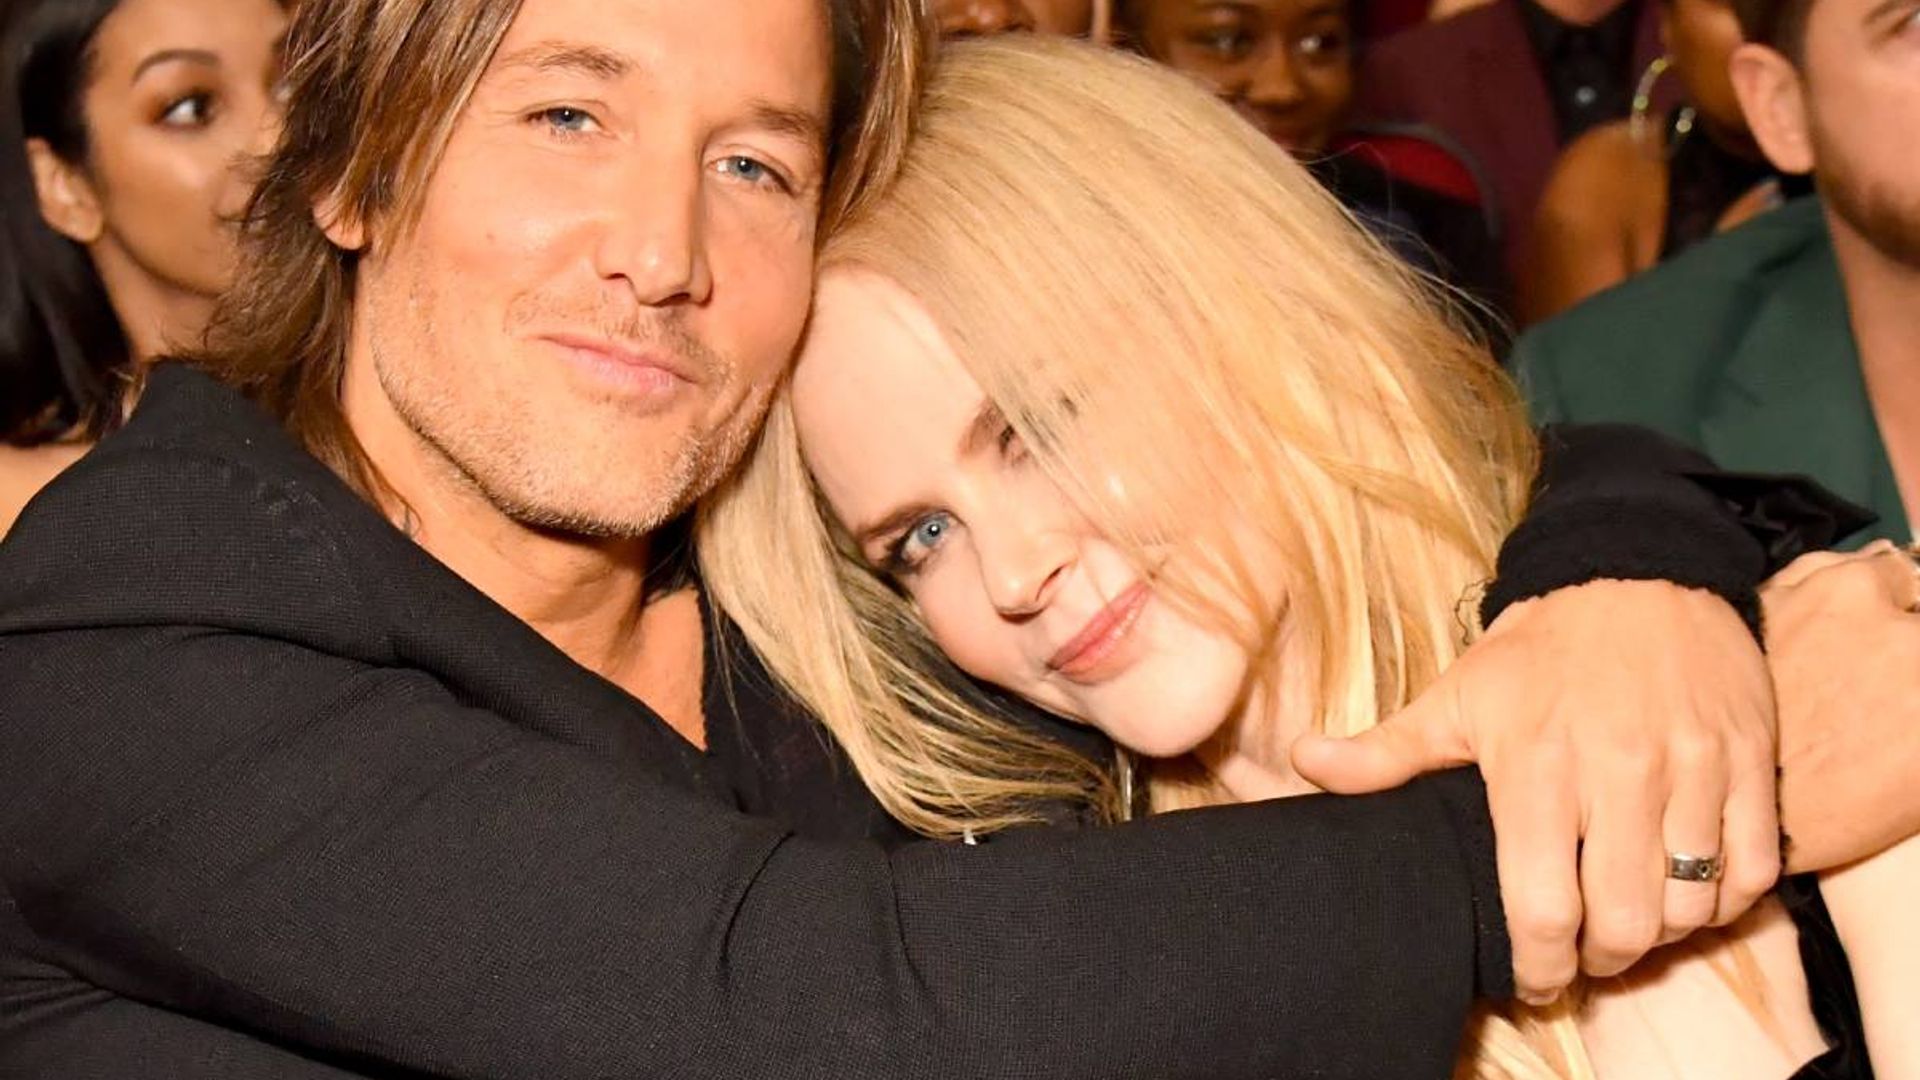 Nicole Kidman's new photo with Keith Urban confuses fans for this surprising reason